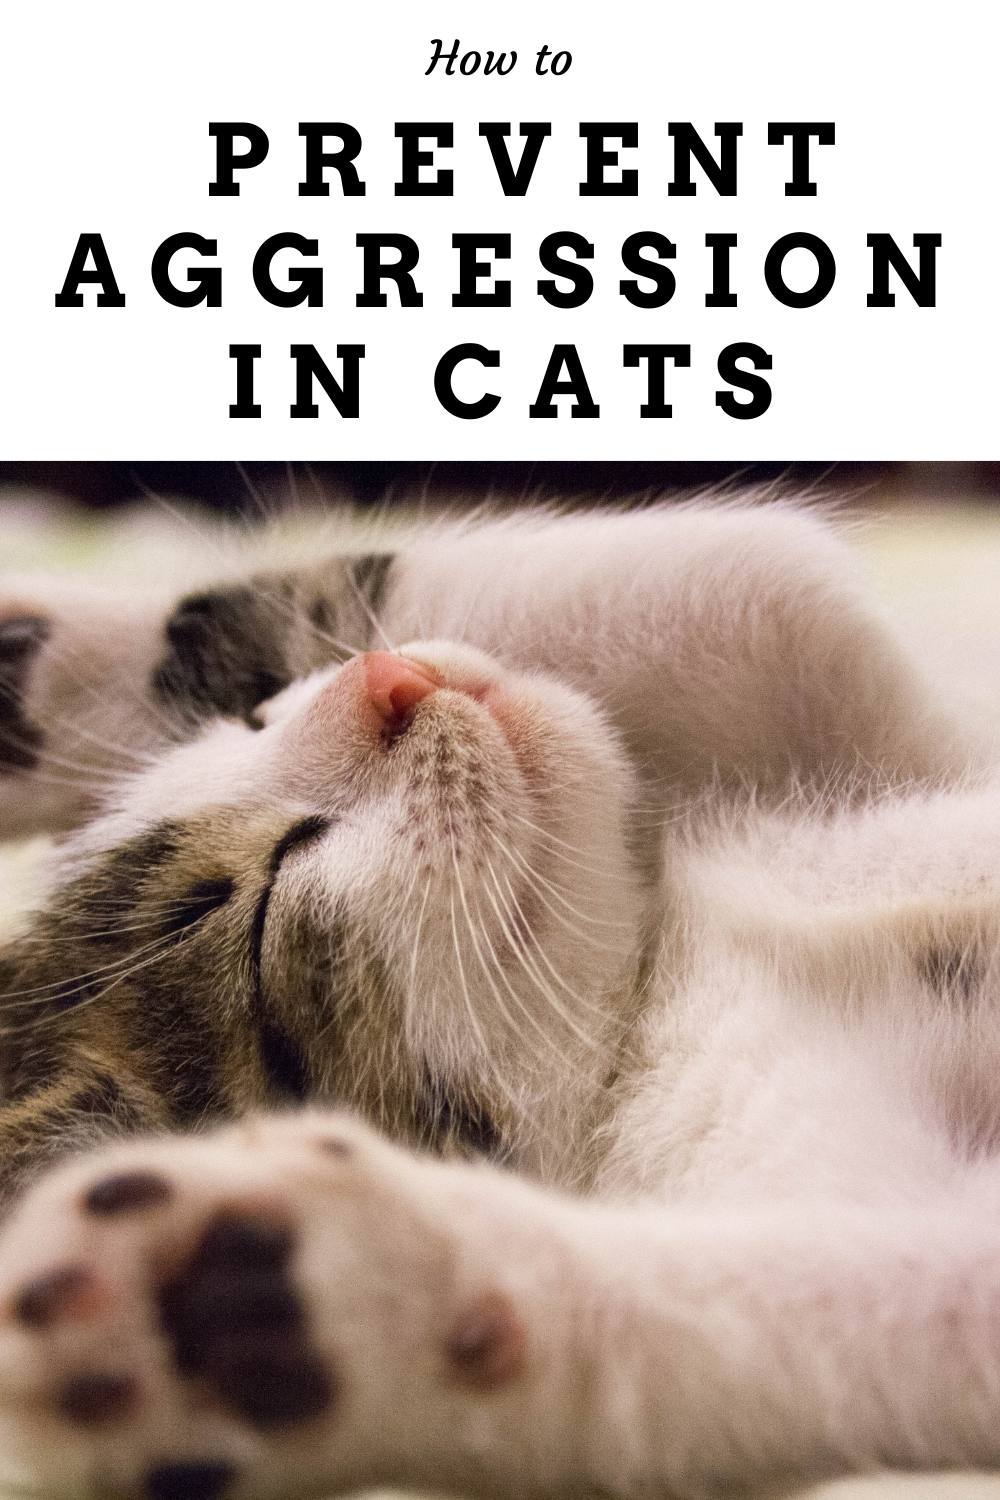 How to Prevent Aggression in Cats